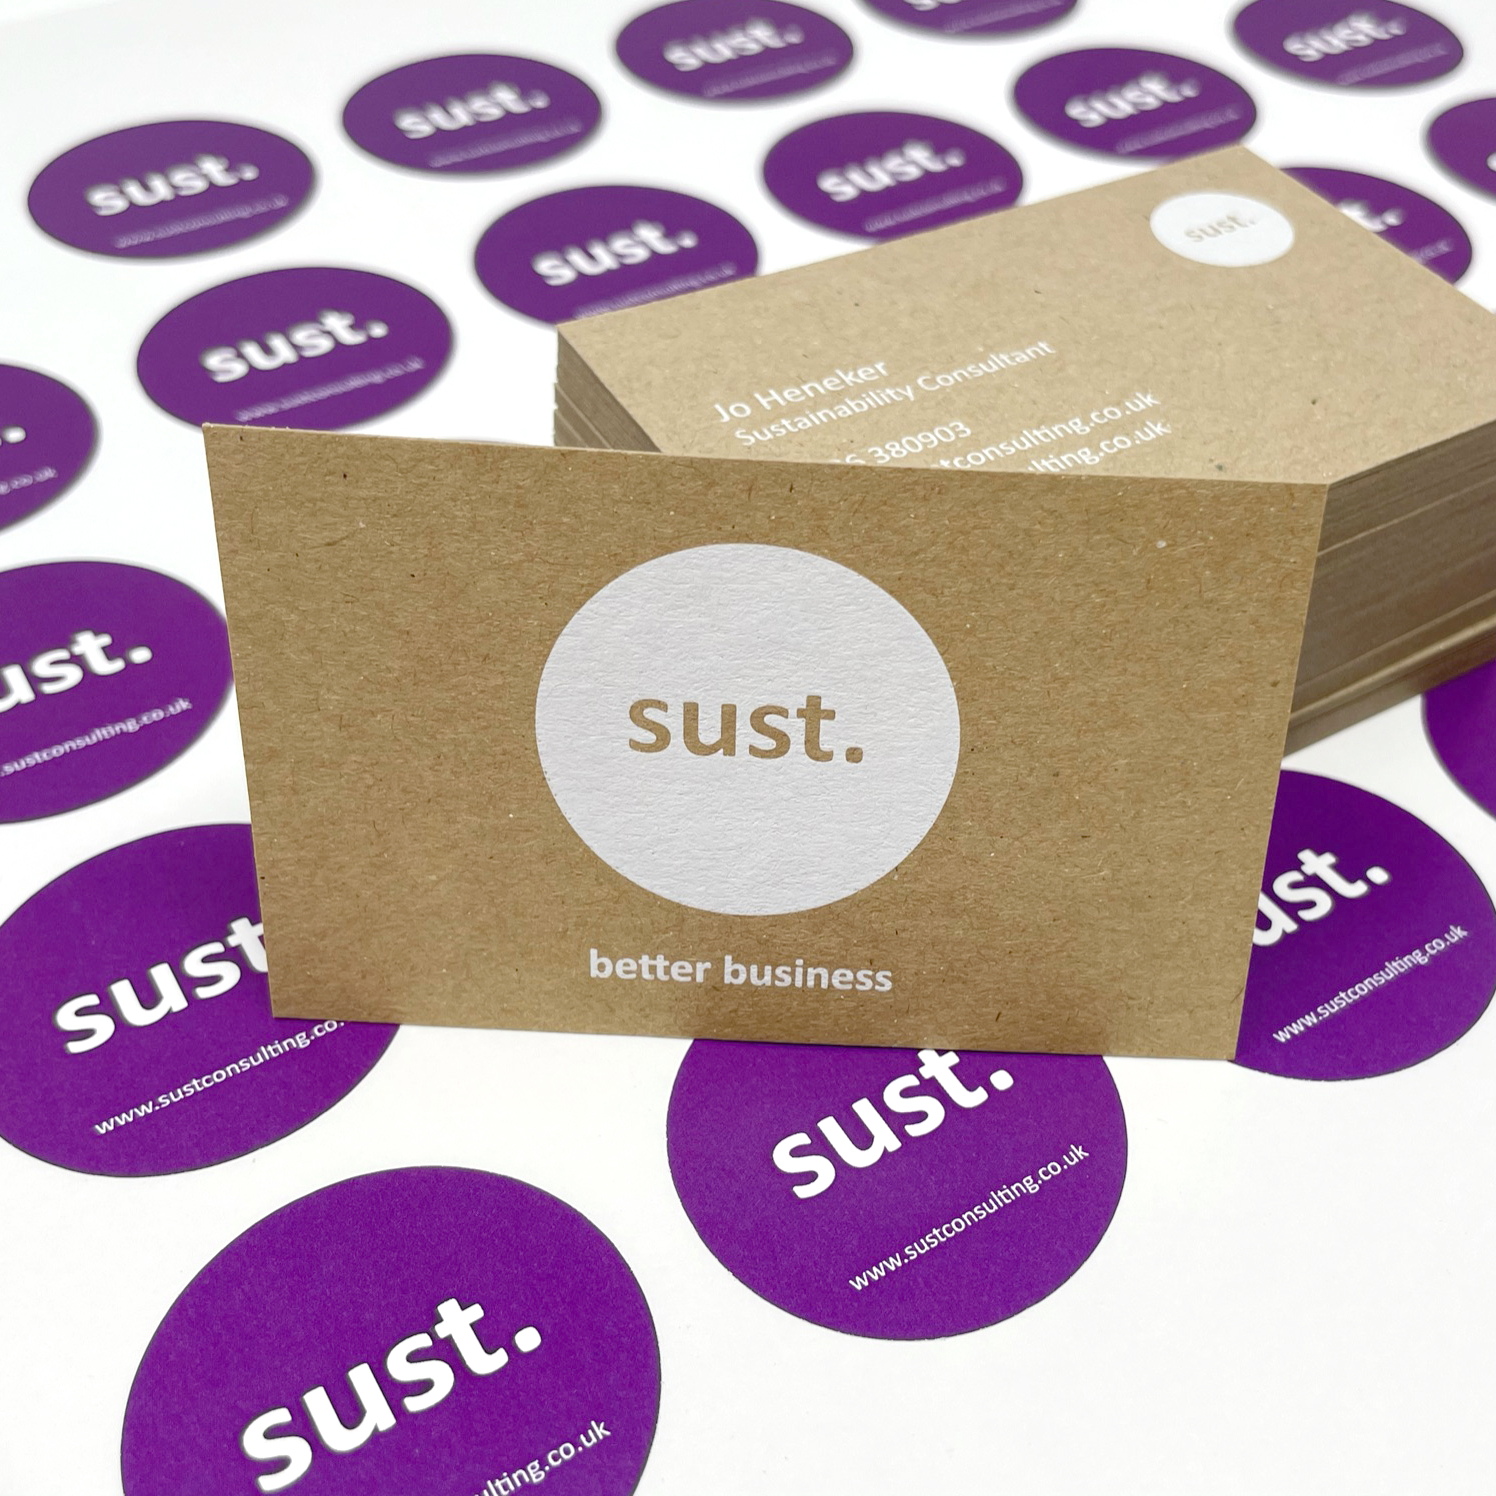 Recycled Brown Kraft Card Business Cards On Post-Consumer Waste For Sust. Consulting